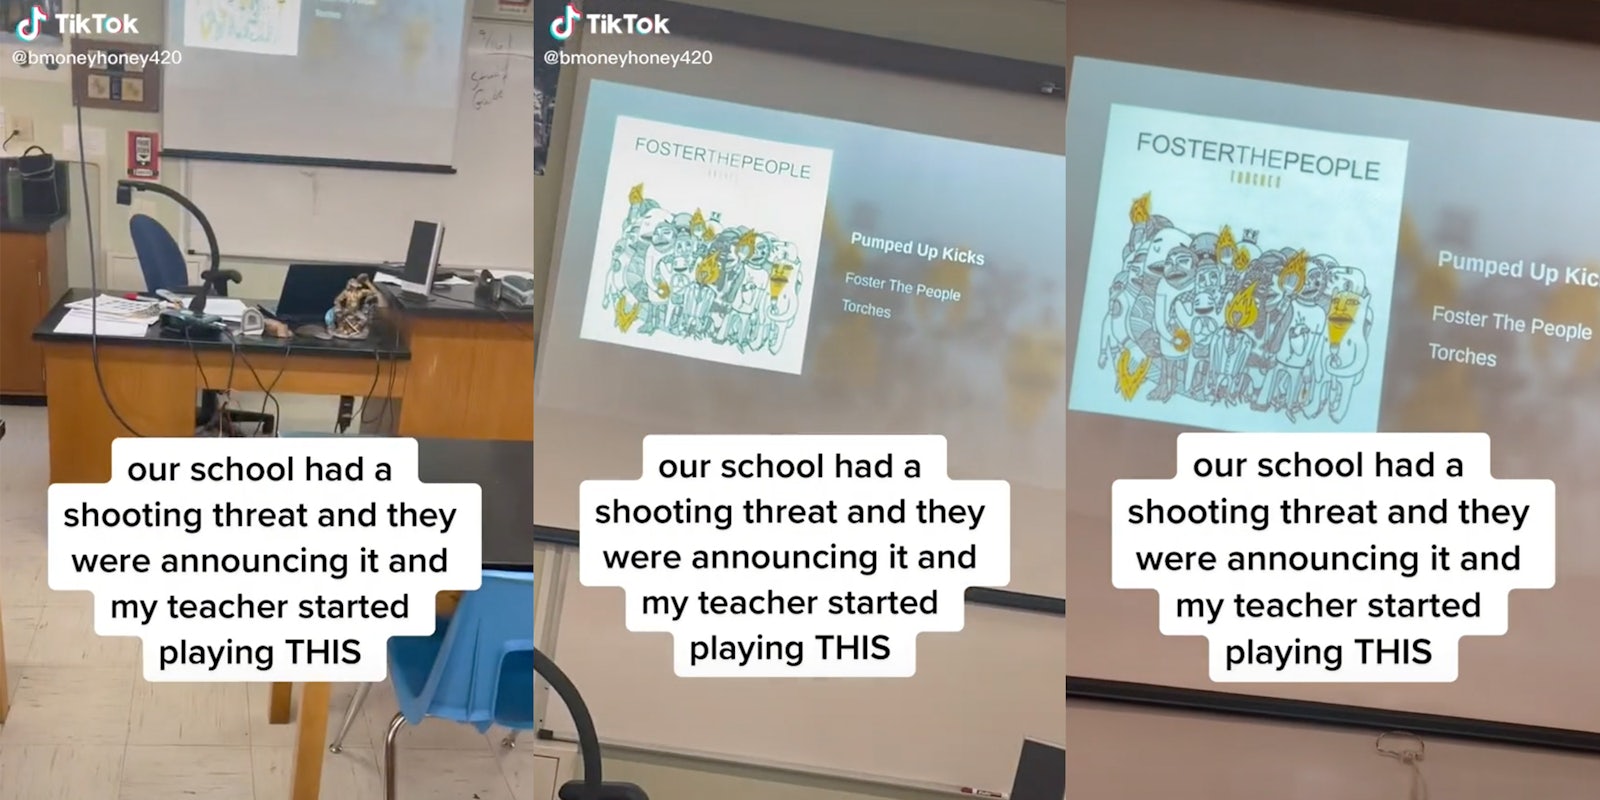 During a school shooting threat, a TikToker's teacher started playing Foster the People's 'Pumped Up Kicks.'